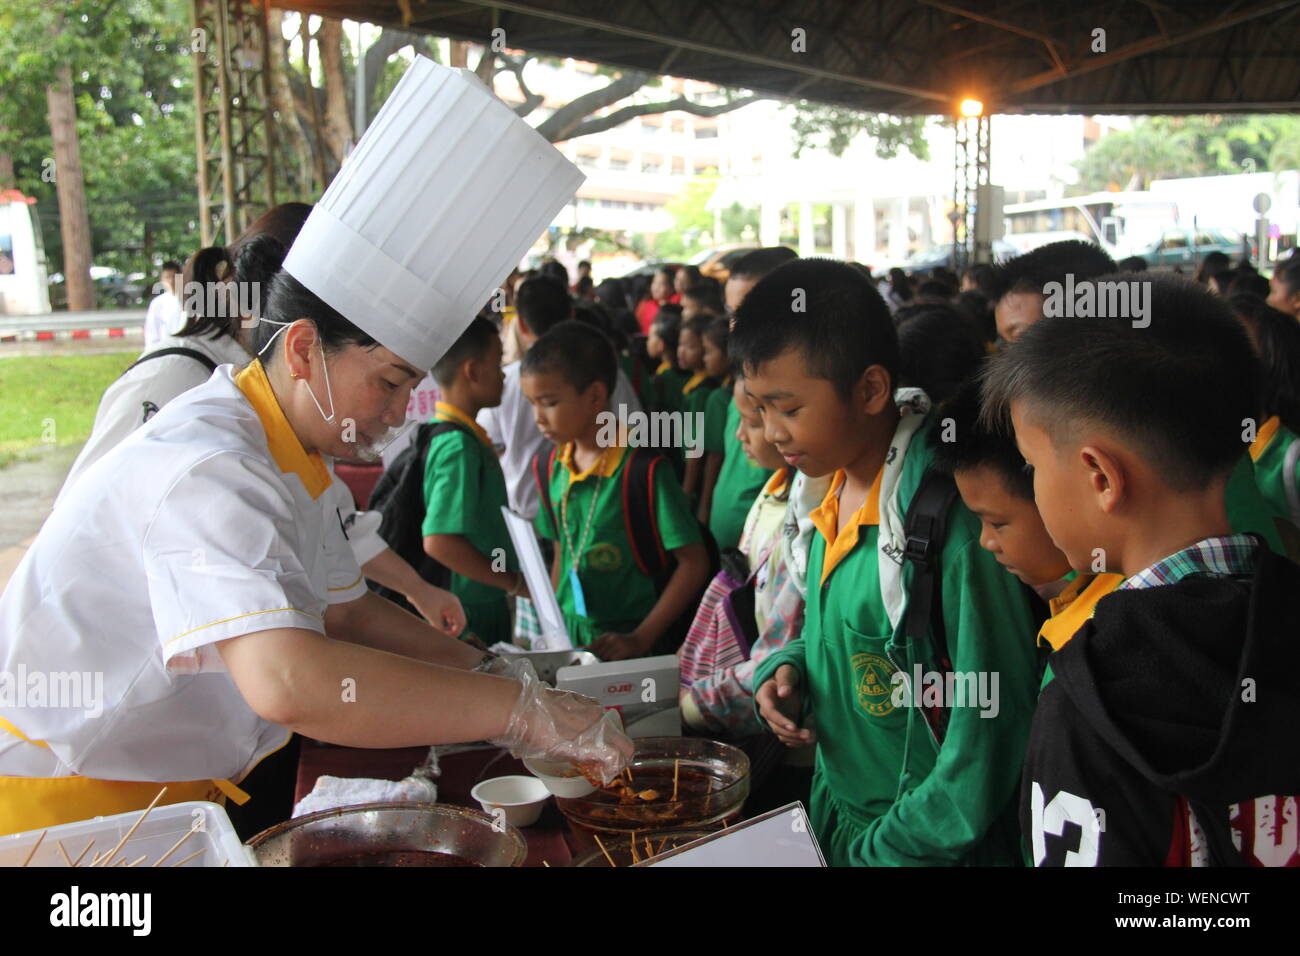 Khon Kaen, Thailand. 30th Aug, 2019. Thai students wait to taste famous Sichuan dish 'boboji' during the third Chinese Kitchen Food and Cultural Festival held by the Confucius Institute at Khon Kaen University in Khon Kaen, Thailand, on Aug. 30, 2019. Some 600 Thai students and local people in the northeastern Thai province of Khon Kaen tasted spicy Sichuan food of China and also got a chance to learn how to cook the Sichuan dishes from top chefs from a Chinese university on Friday. Credit: Yang Zhou/Xinhua/Alamy Live News Stock Photo